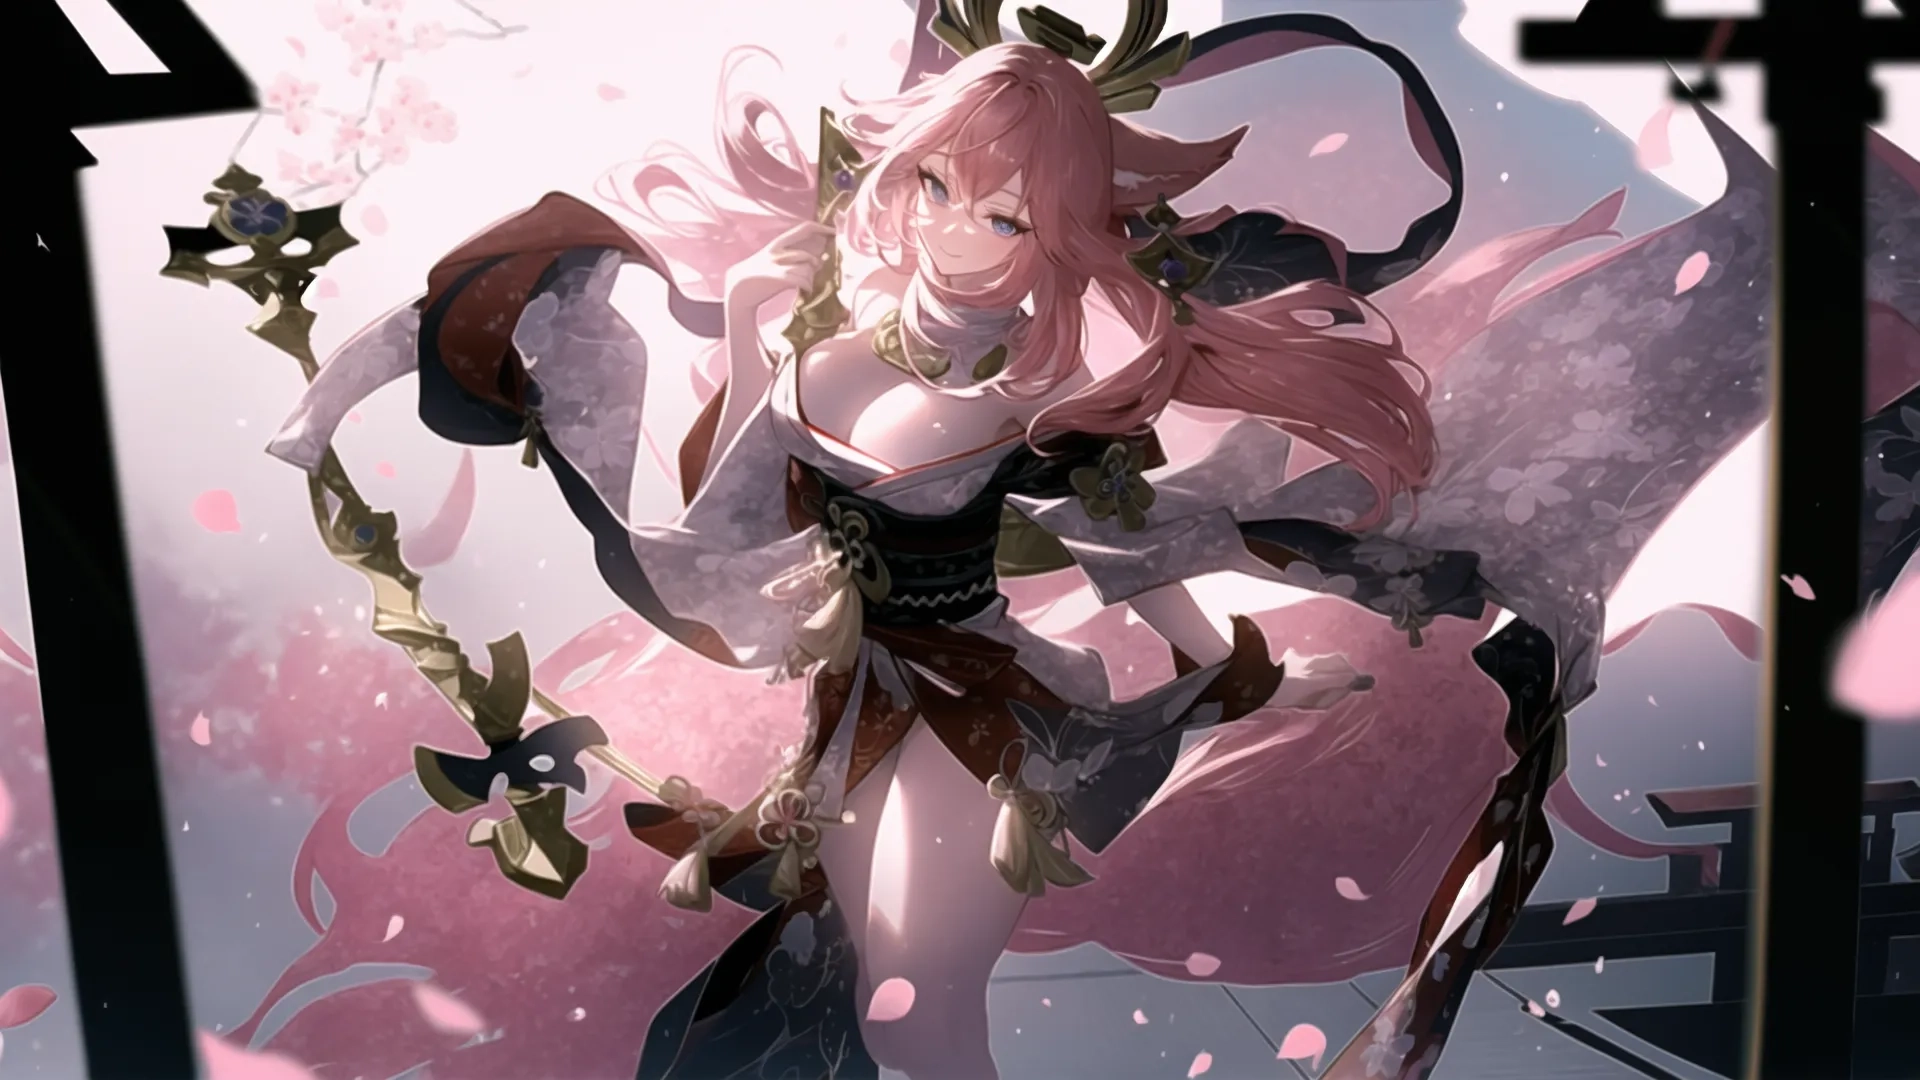 a girl on an iron platform with lots of stuff inside her hands and a sword in her hand under the covers and there is falling petals in the air
